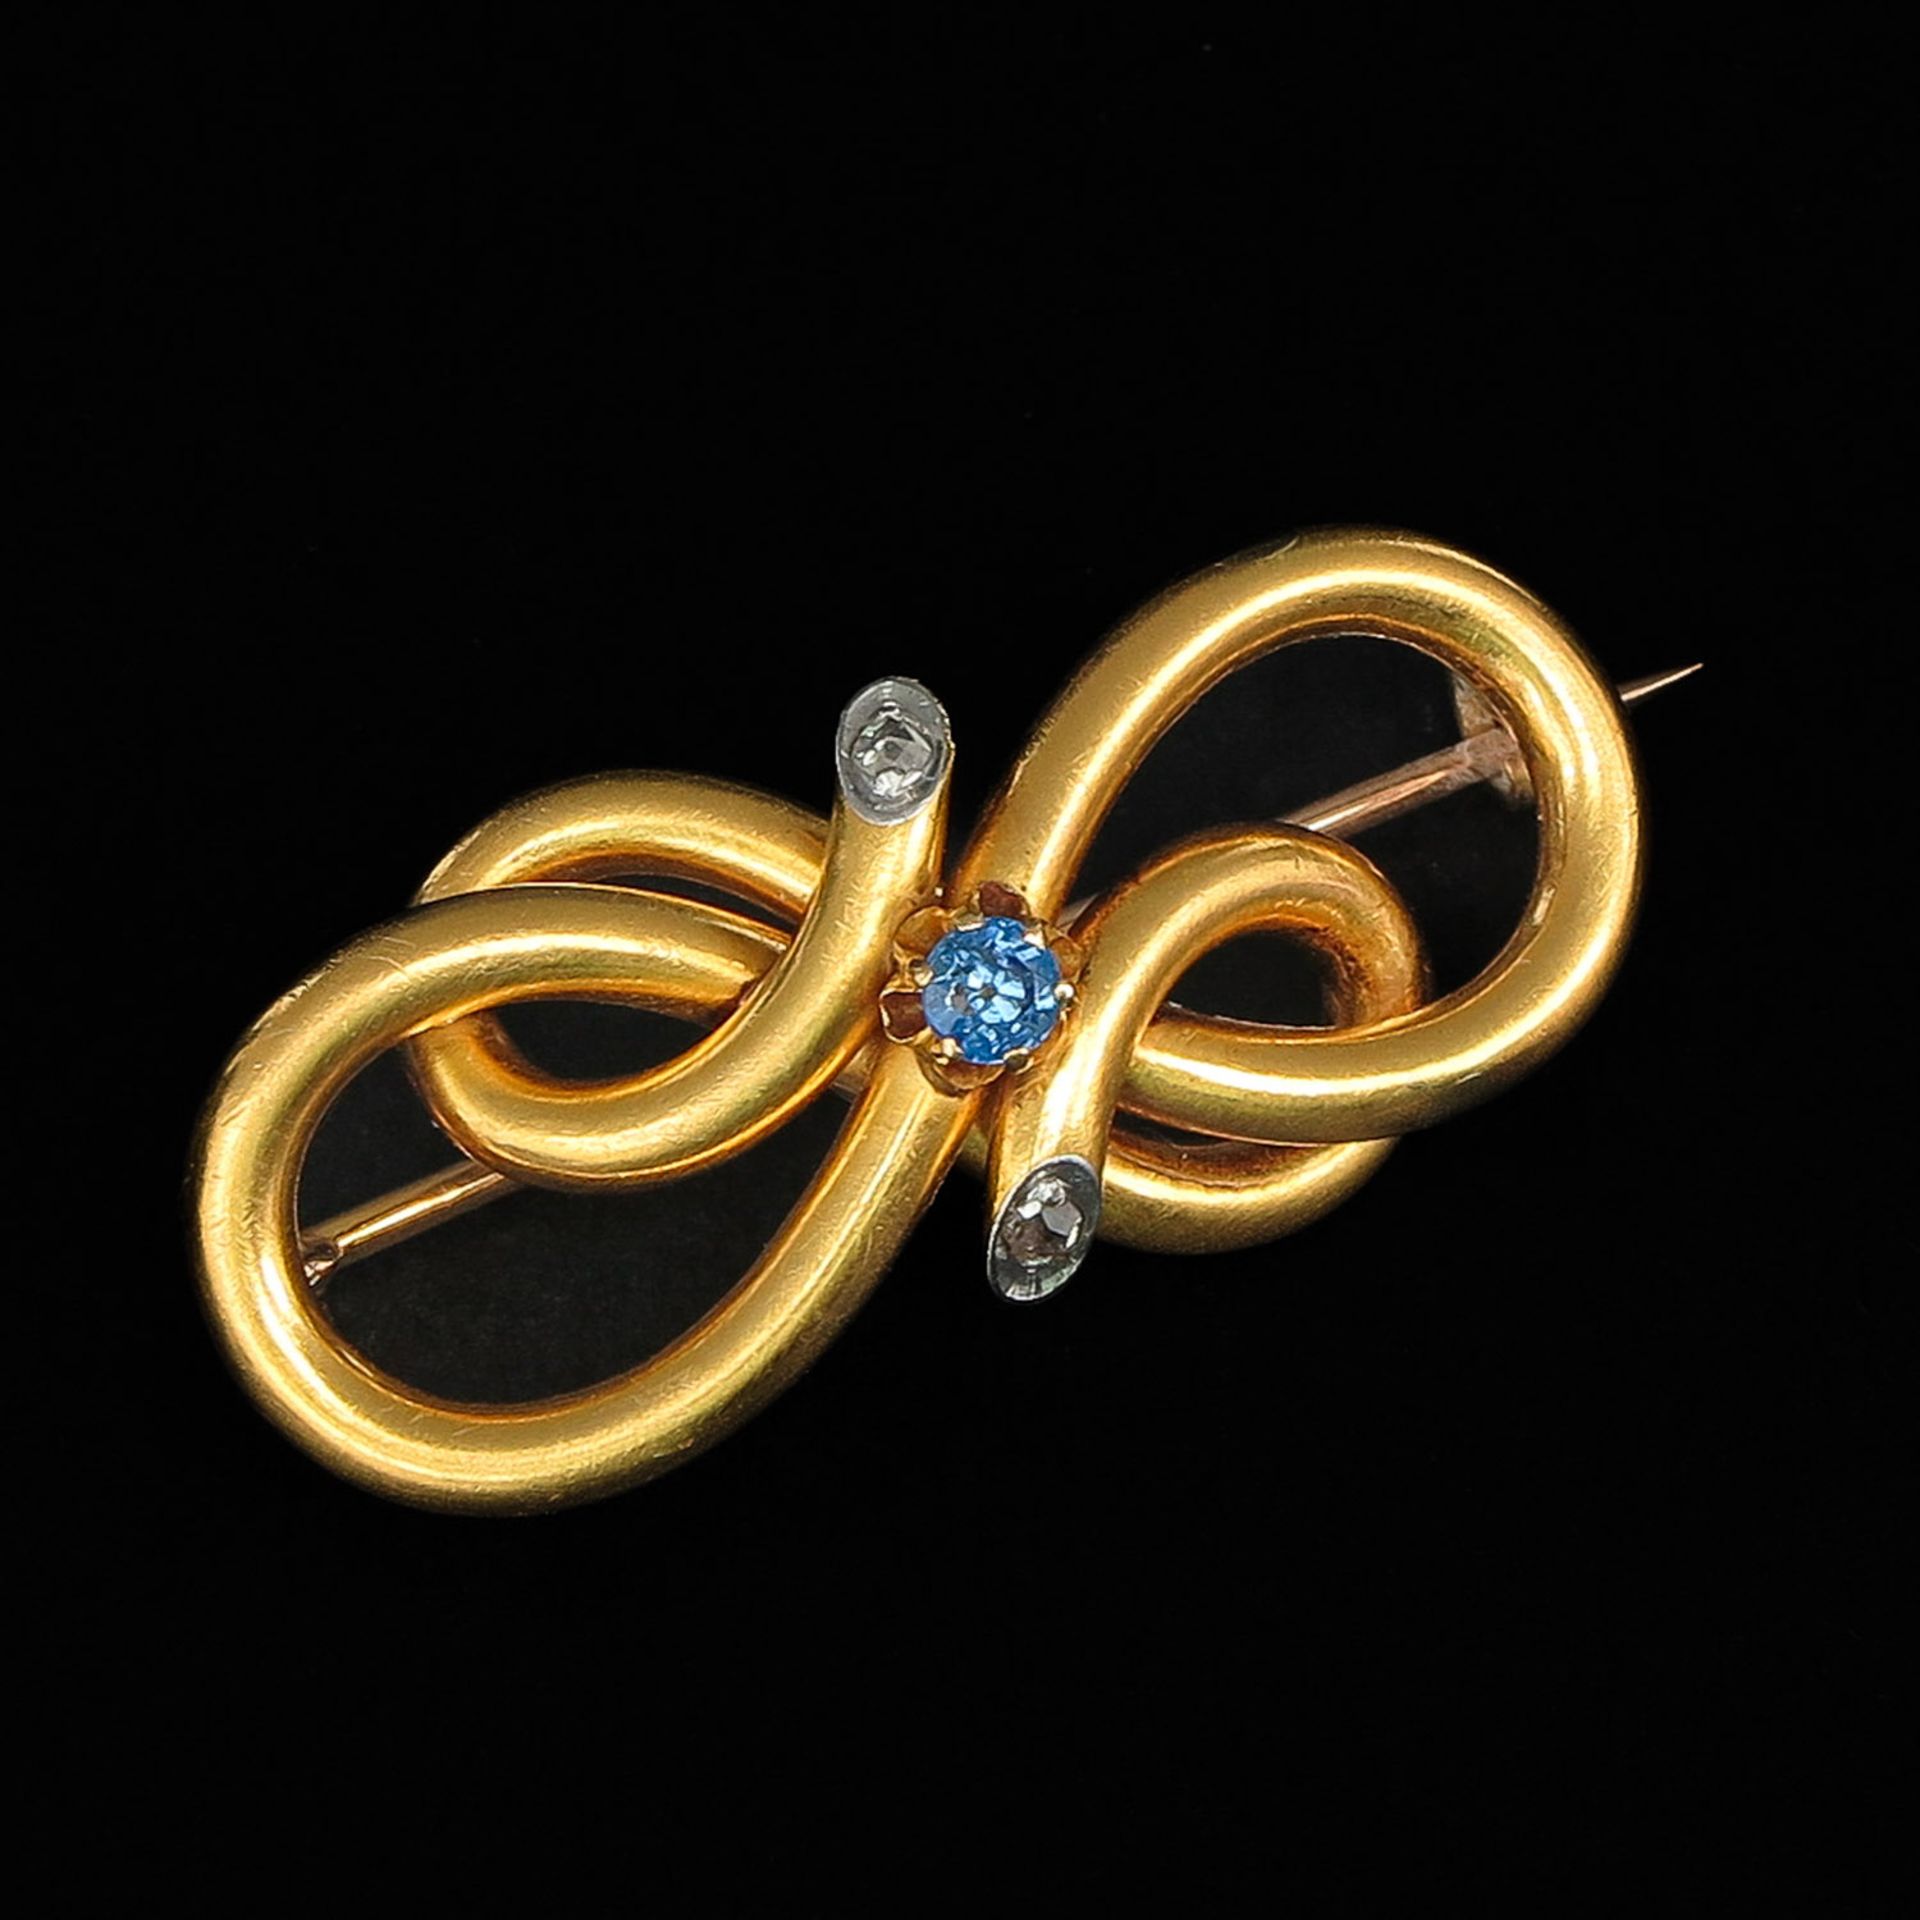 A Brooch in the Form of a Knot